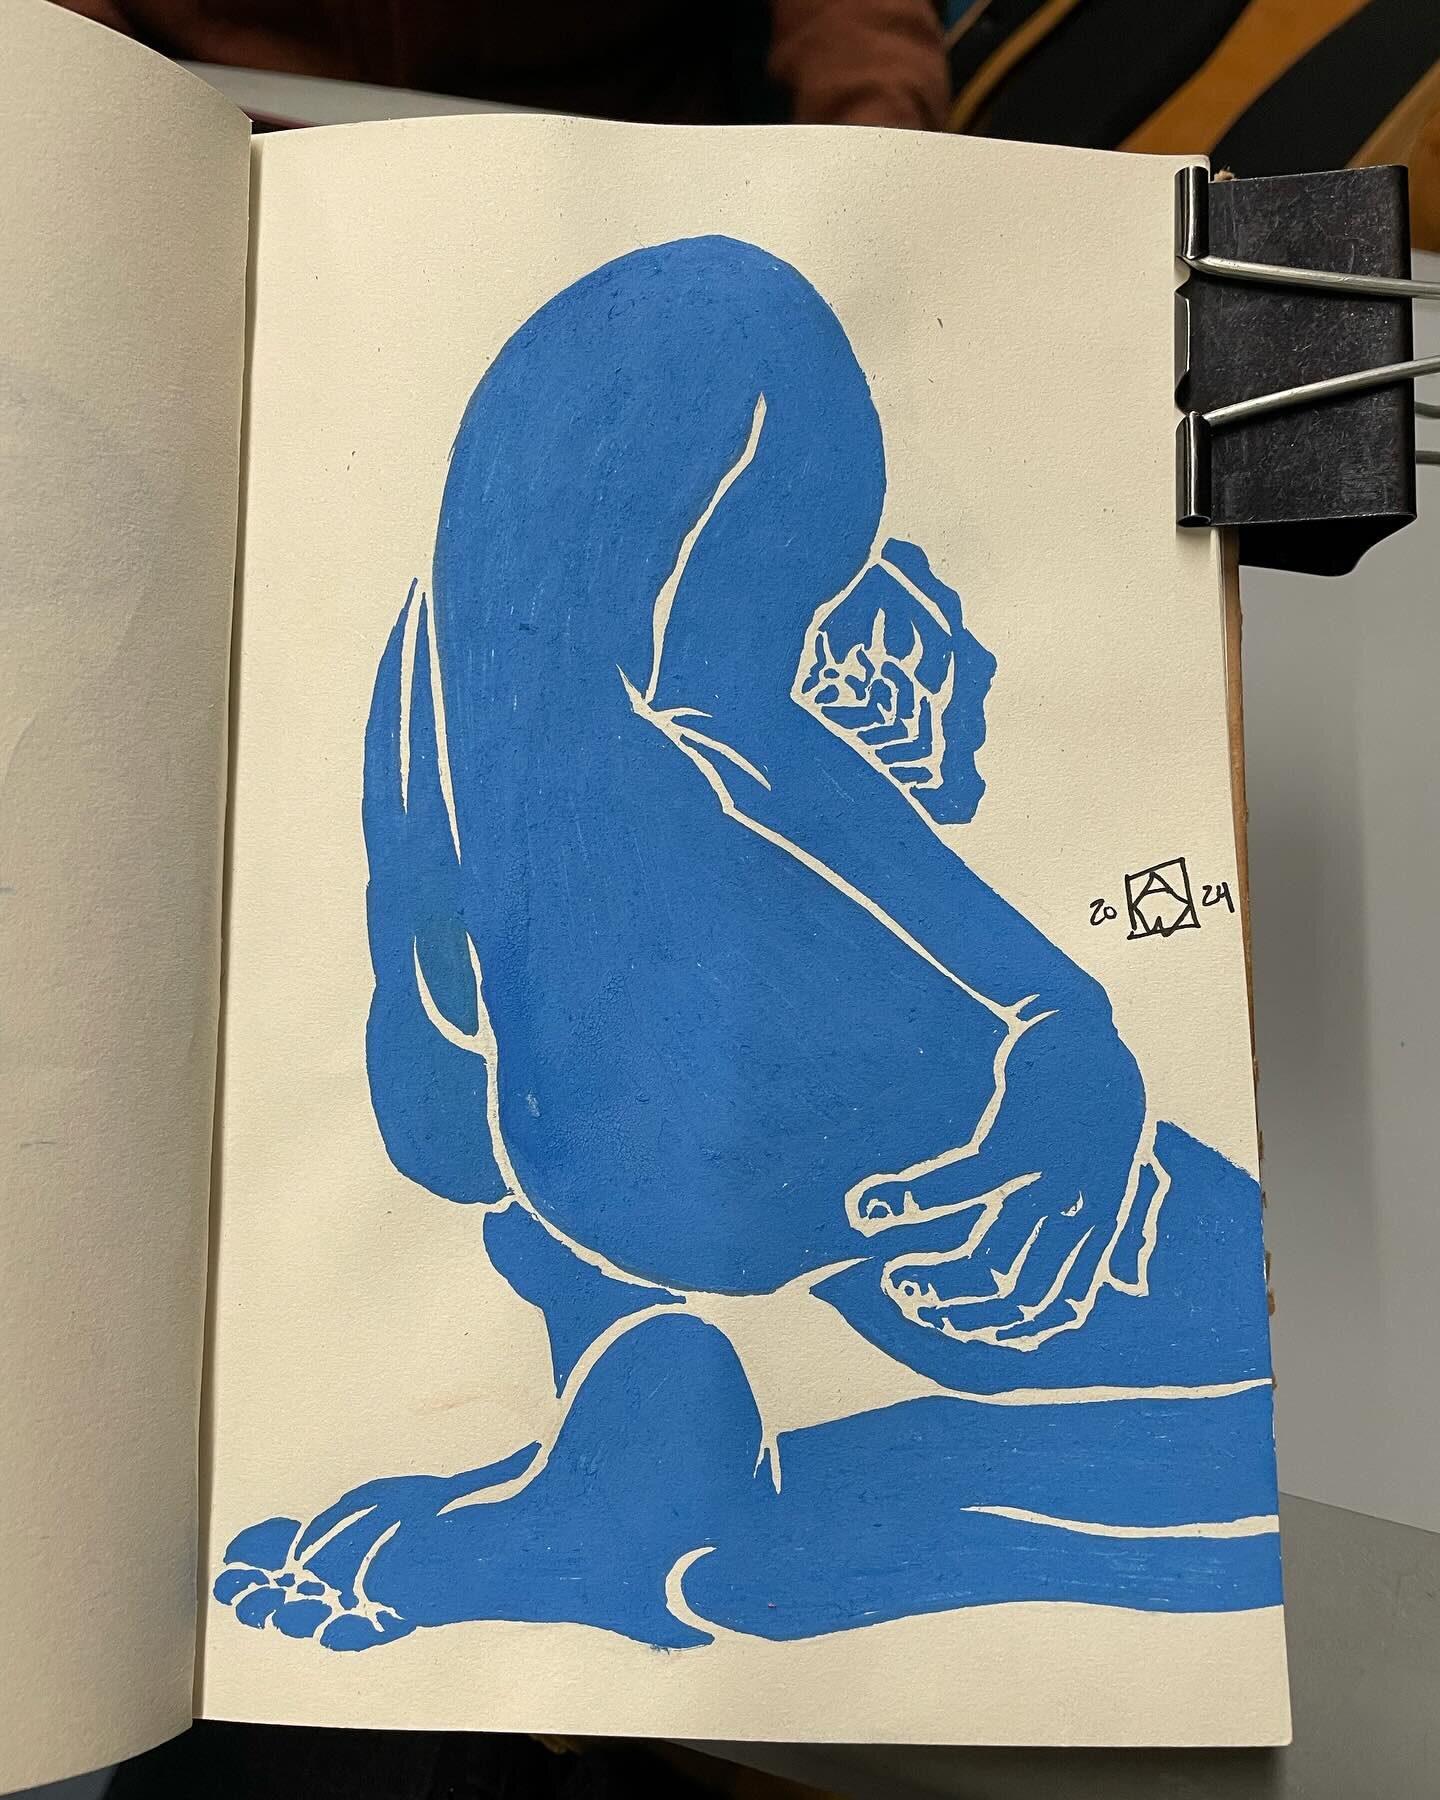 More blue figures. 

Hers another pose from the same @draw_brighton session with model, Nicole -- AKA @bluede_model3 -- from a few weeks back. 

Ive not been drawing however. Instead @lyndsaylucero and I've spent the morning figuring out how to fix t